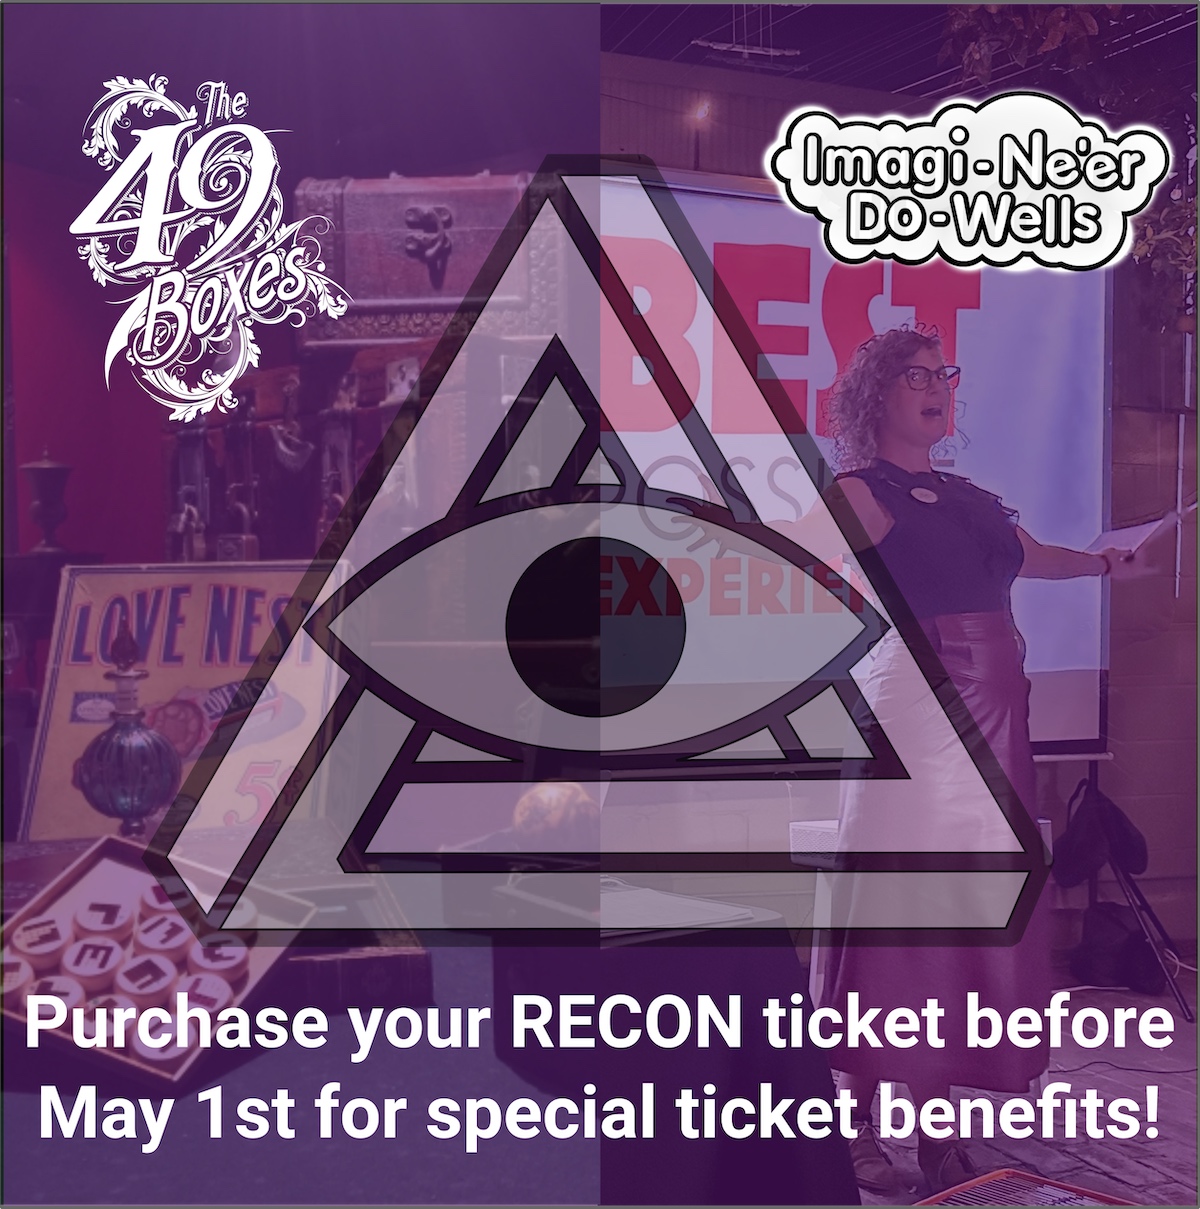 Reminder: Get your RECON Los Angeles ticket by May 1st!